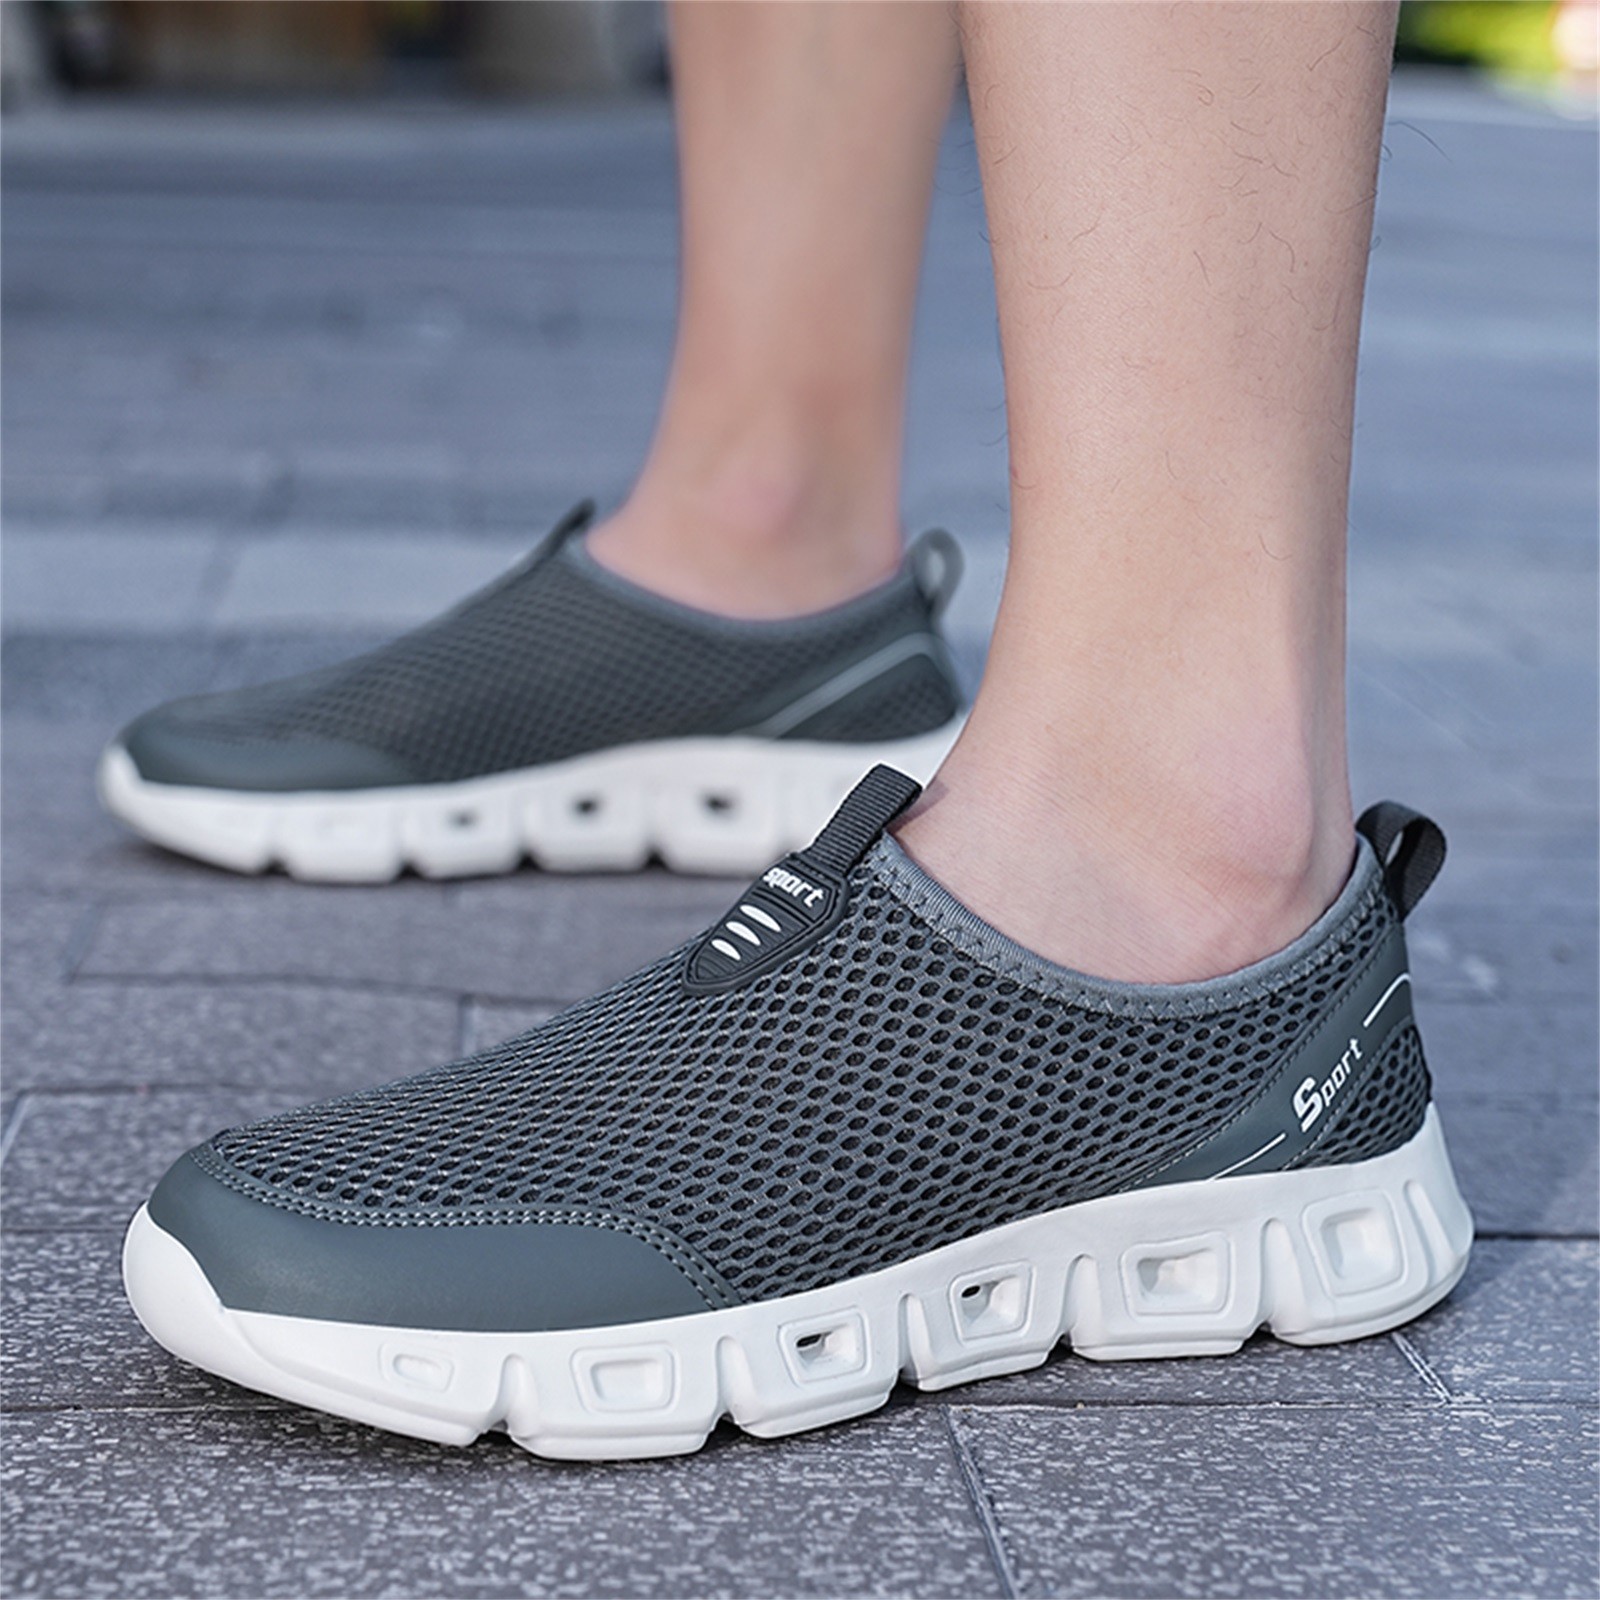 Gubotare Casual Shoes For Men Mens Non Slip Walking Sneakers Lightweight Breathable Slip on Running Shoes Gym Tennis Shoes for Men,Dark Gray 9 - image 1 of 4